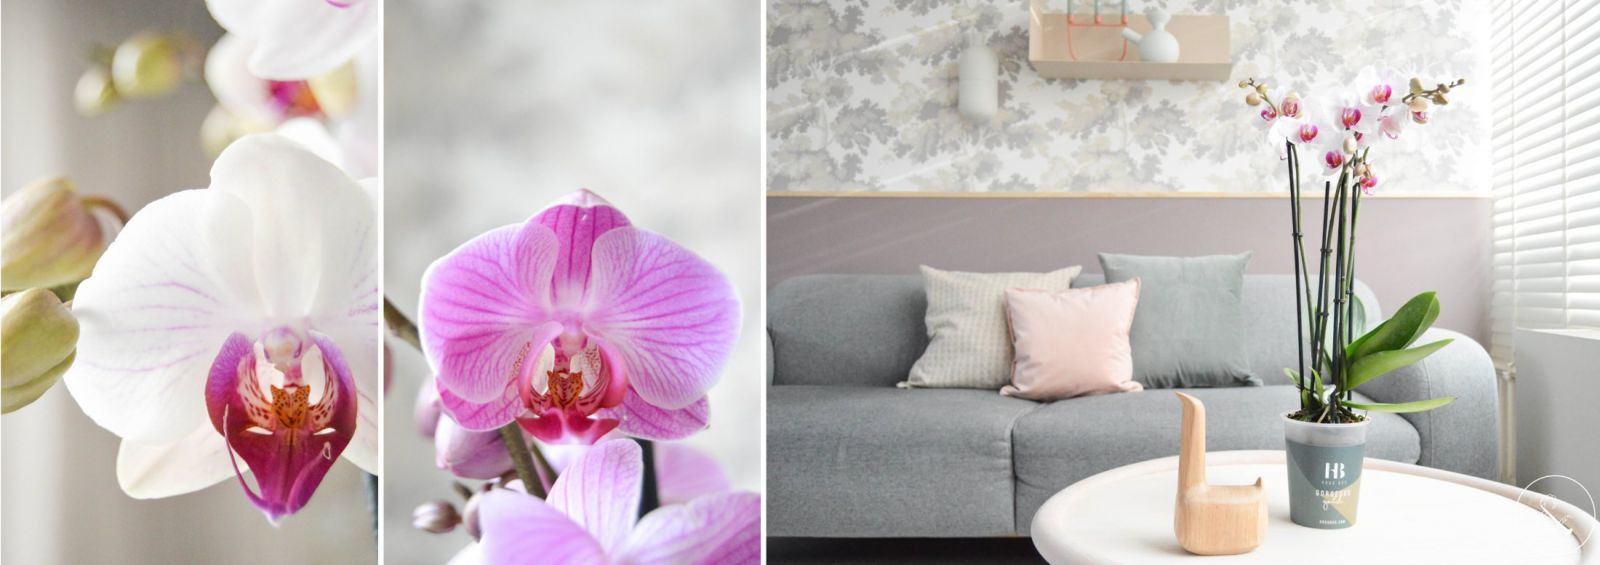 how to maintain a phalaenopsis